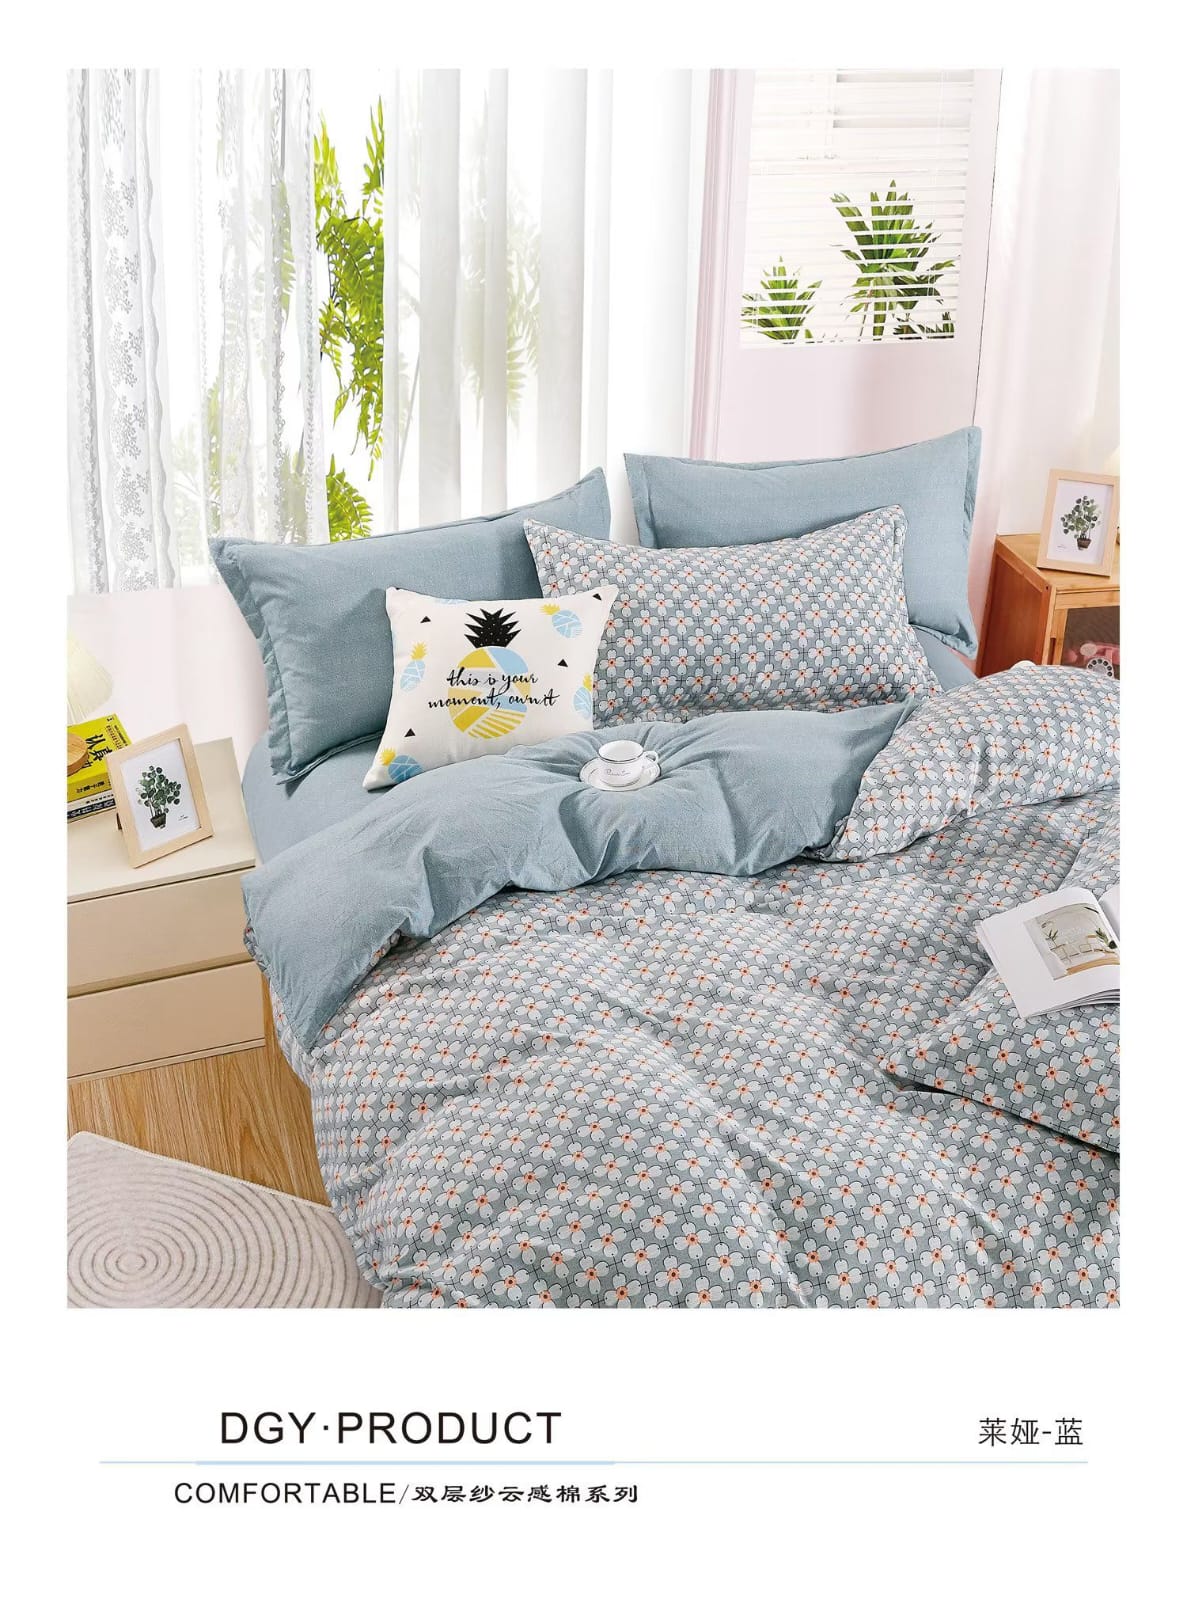 New Arrival: 100% cotton King size comforter 6in1 set